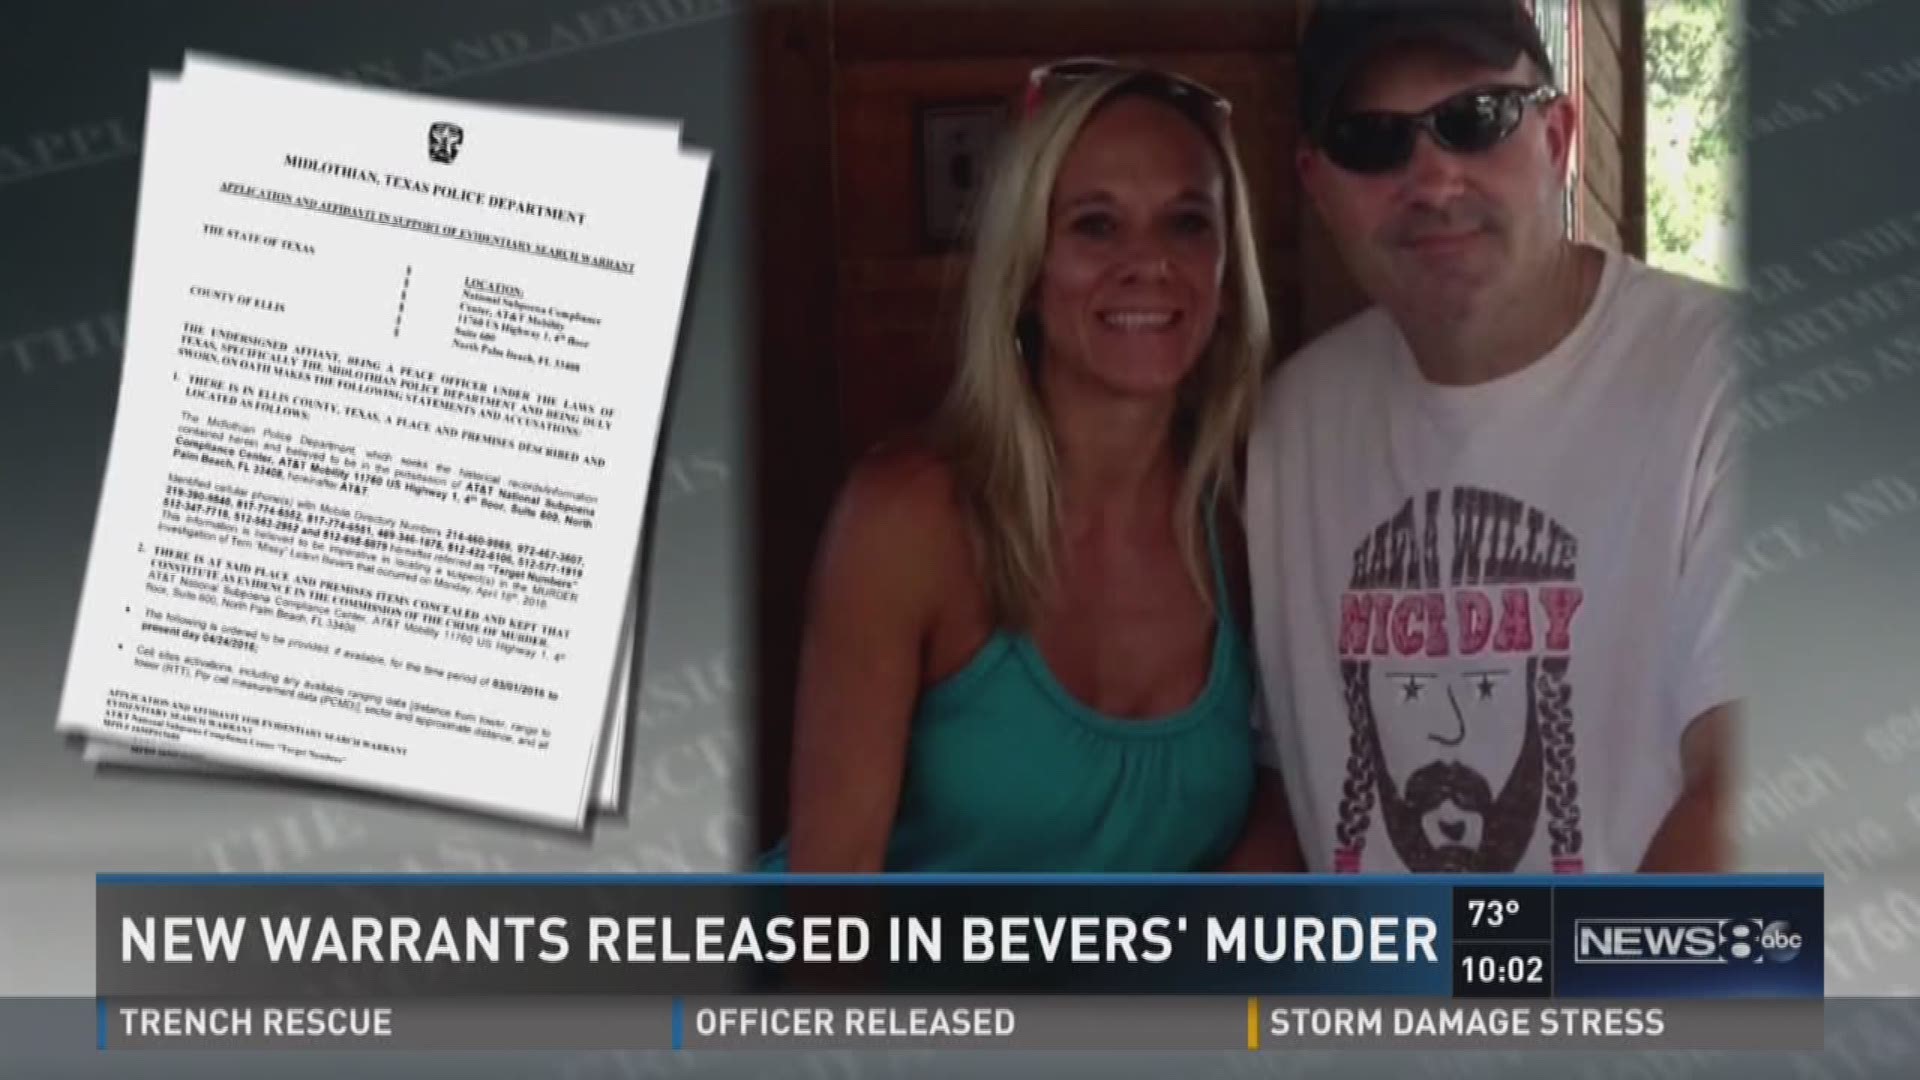 Newly released warrants in the investigation into fitness instructor Missy Bevers murder are revealing new insights into her personal life and how police are proceeding with the investigation. News 8's Jason Whitely has more.